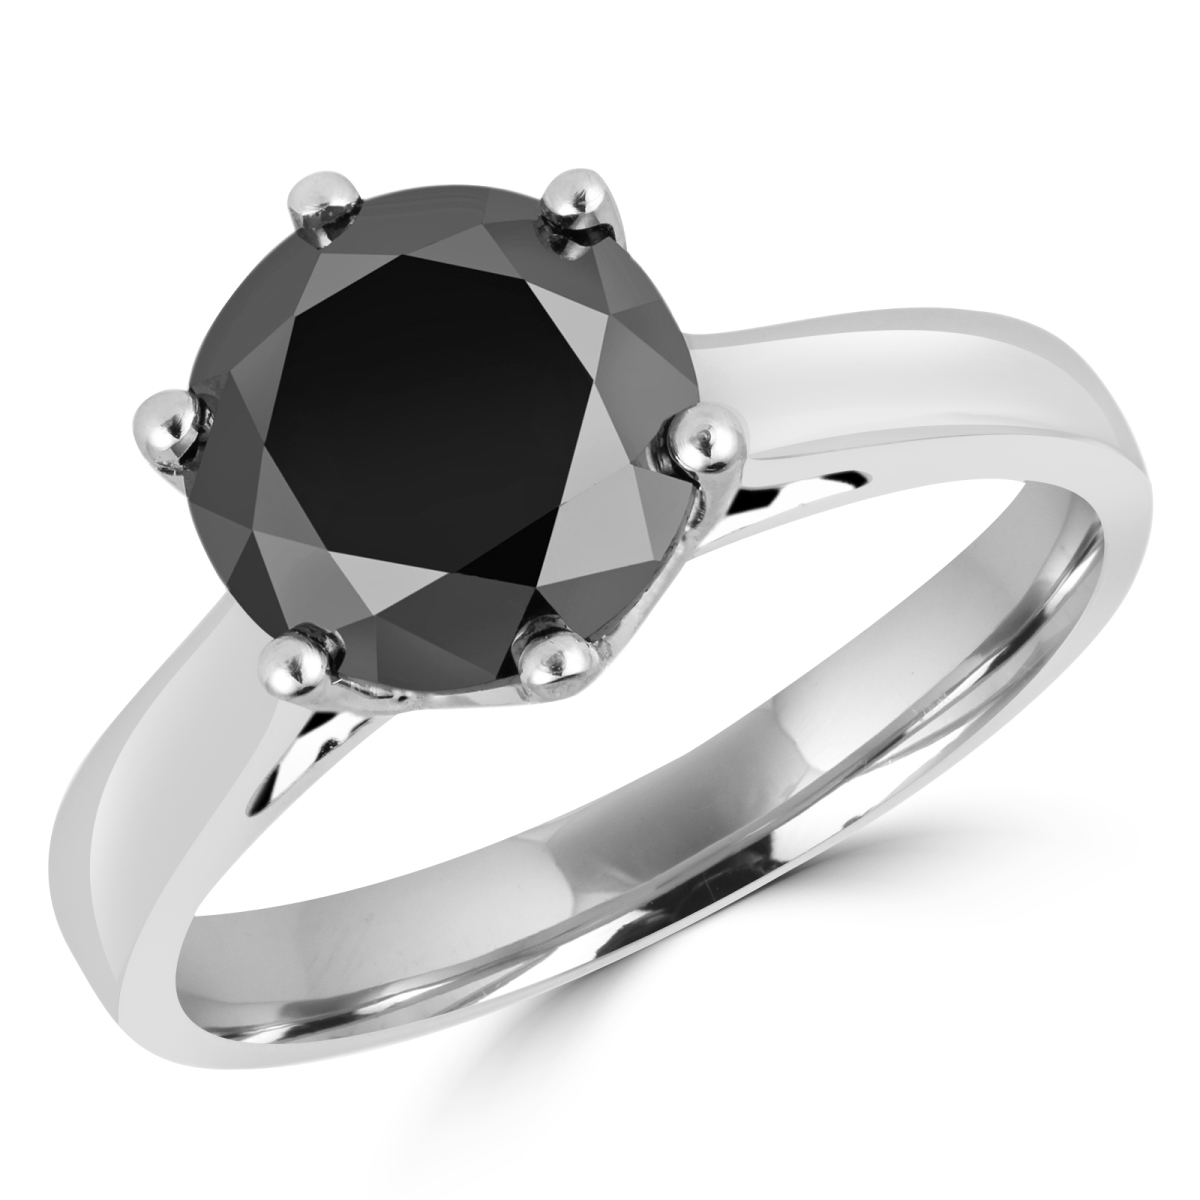 Picture of Majesty Diamonds MD170223-8 0.87 CT Round Black Diamond 6 Prong Solitaire Engagement Ring in 14K White Gold - Size 8